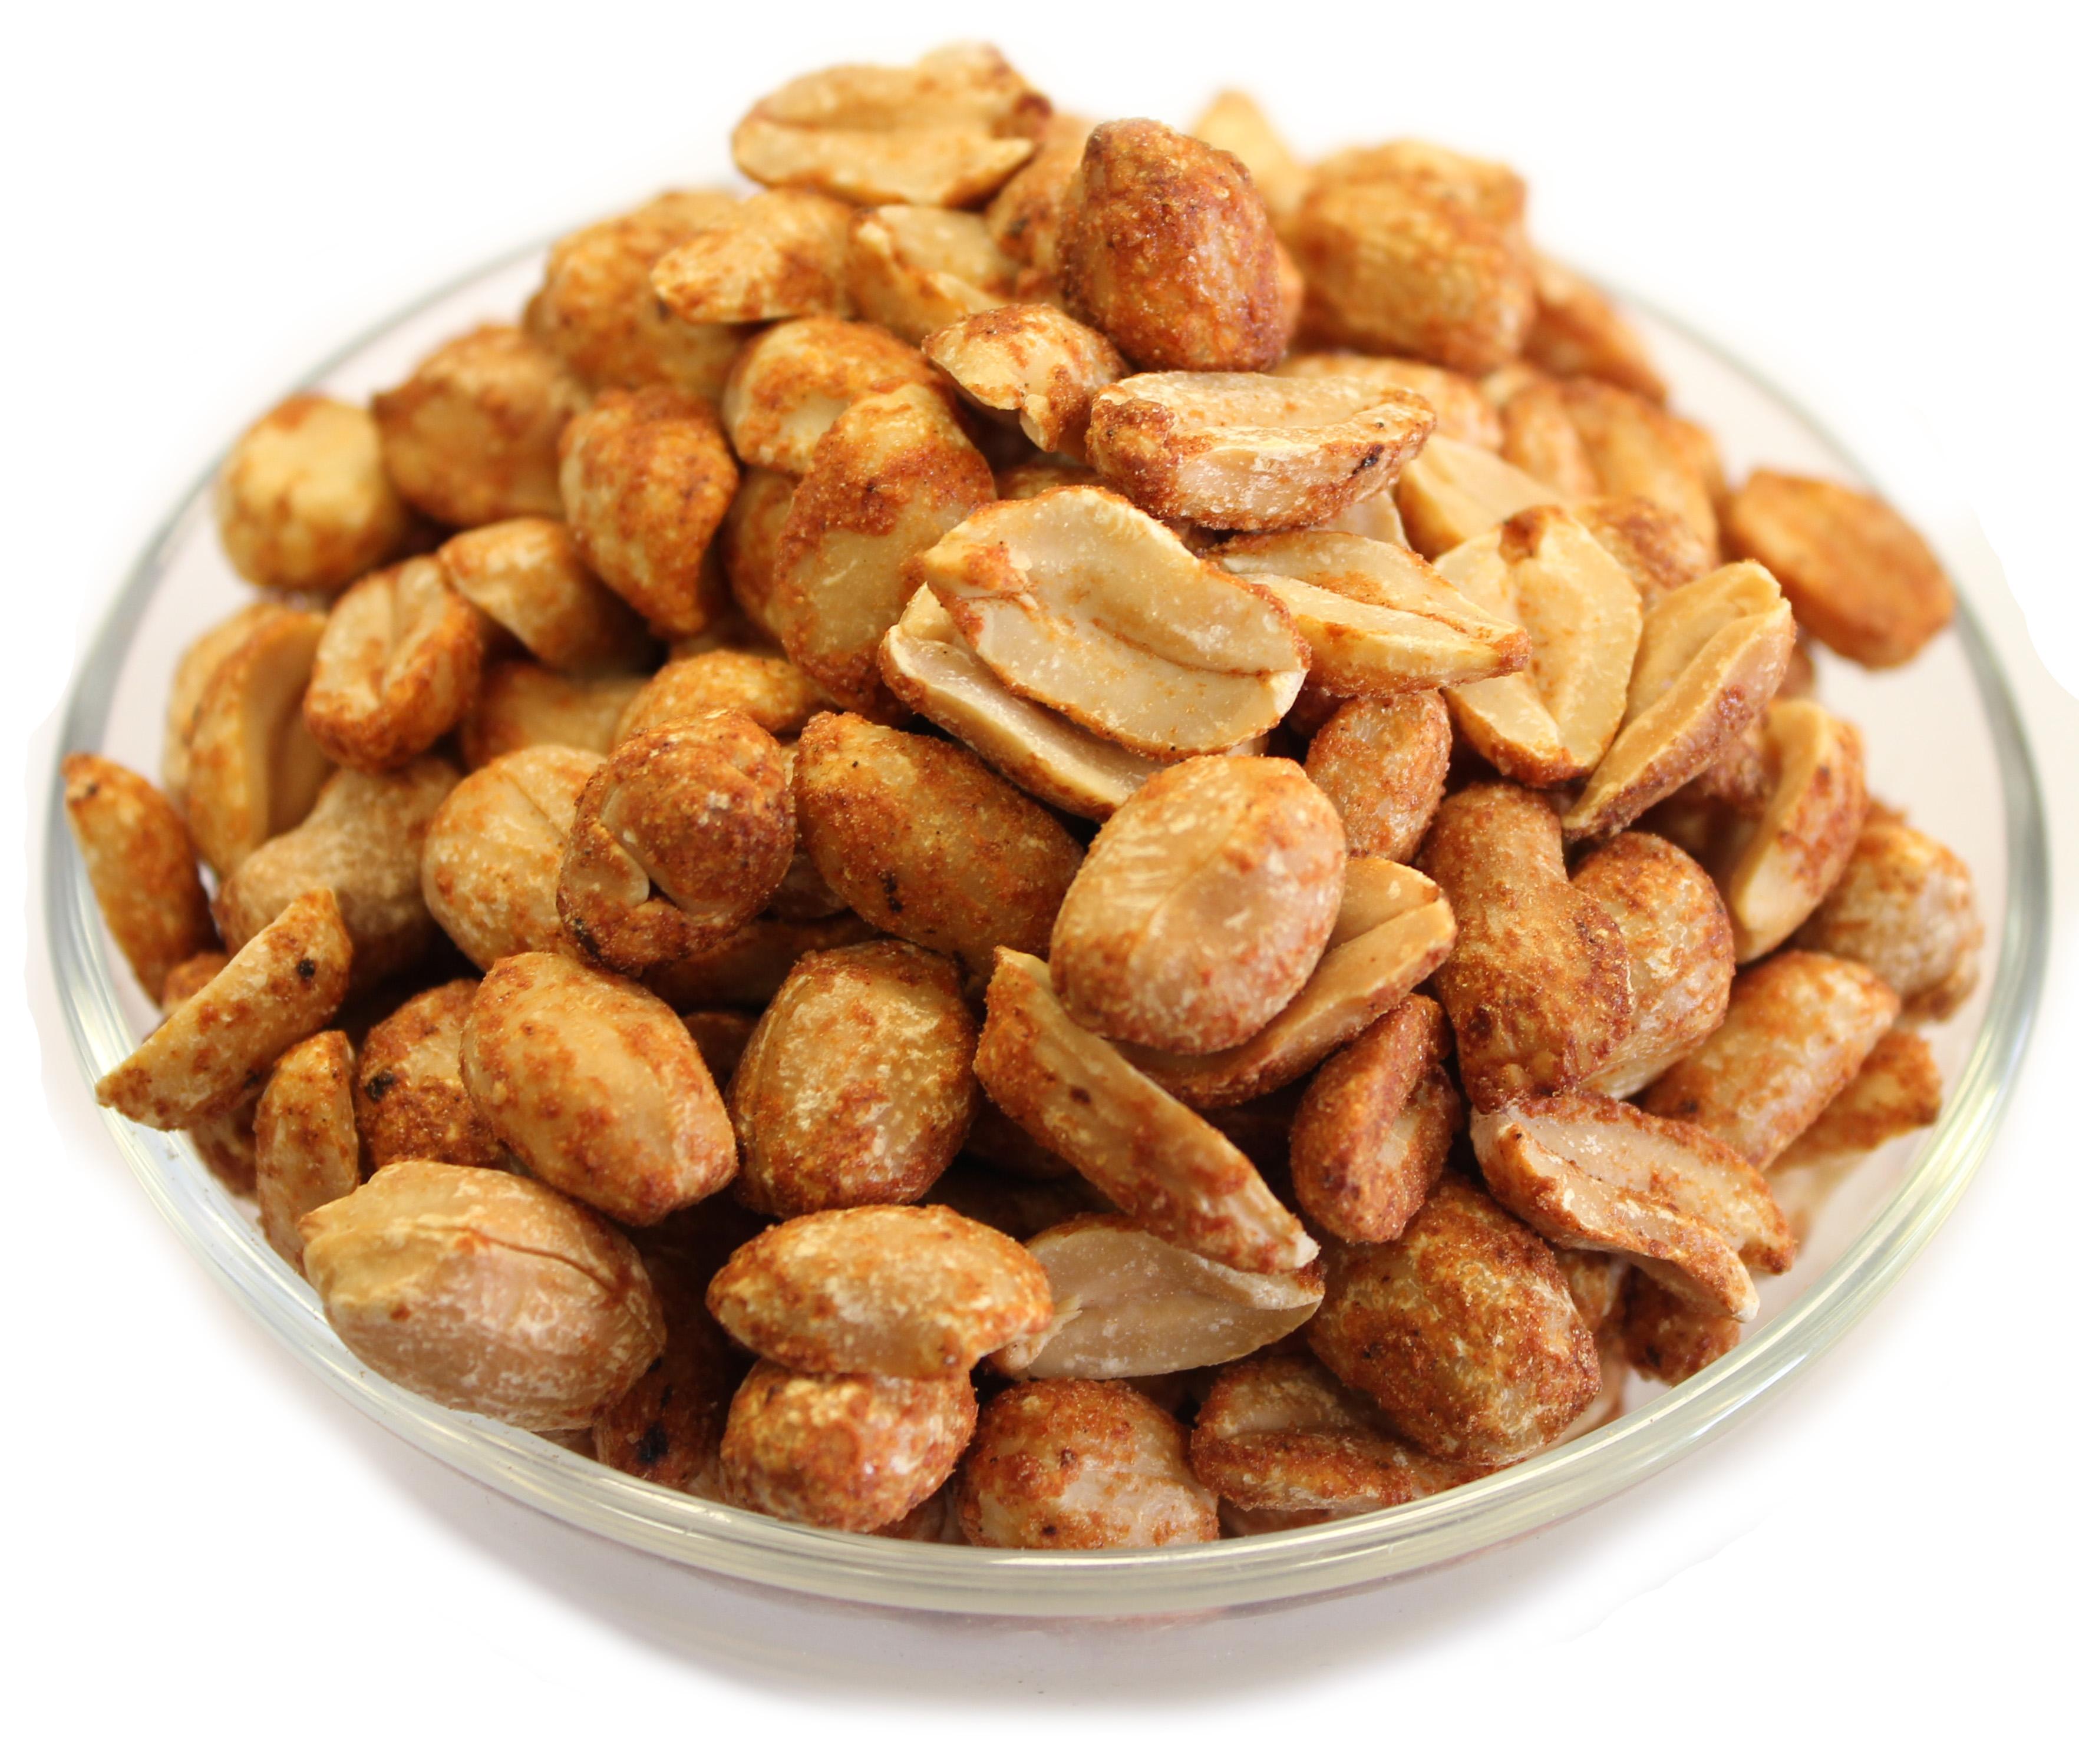 Roasted Peanuts with Chili